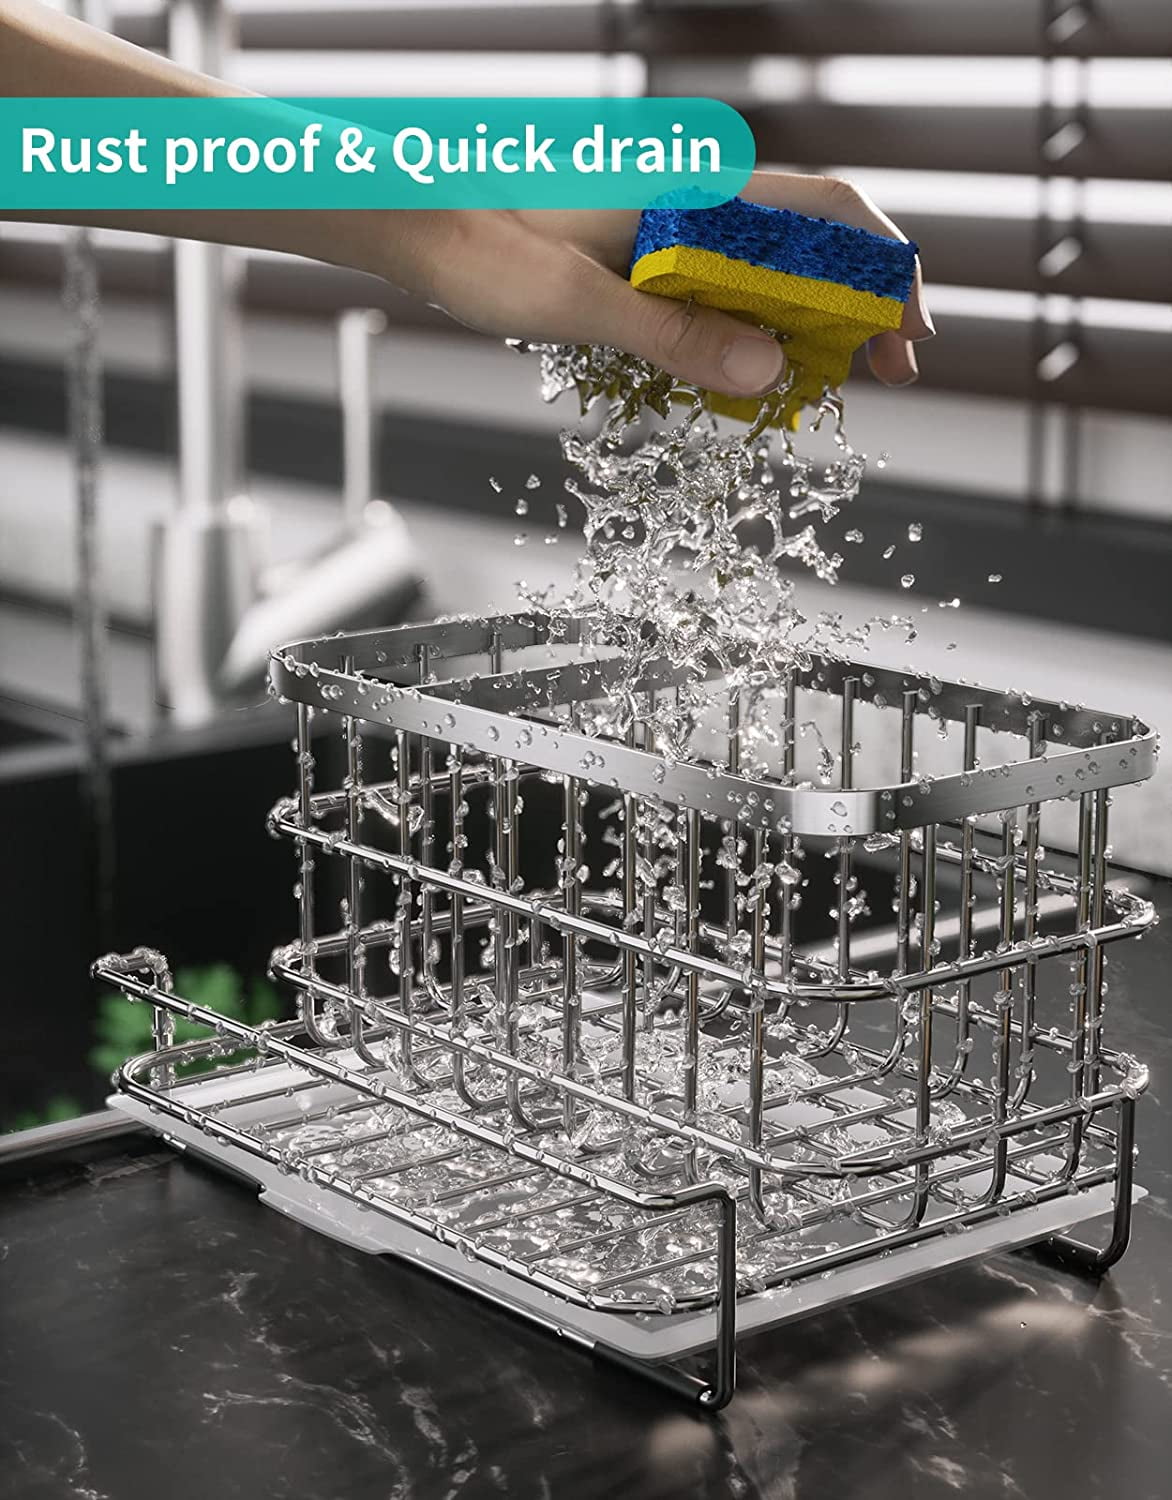 Handy Housewares Kitchen Sink Caddy Dish Soap Scrubber Sponge Holder Basket  with Suction Cups - White - Bed Bath & Beyond - 32570749